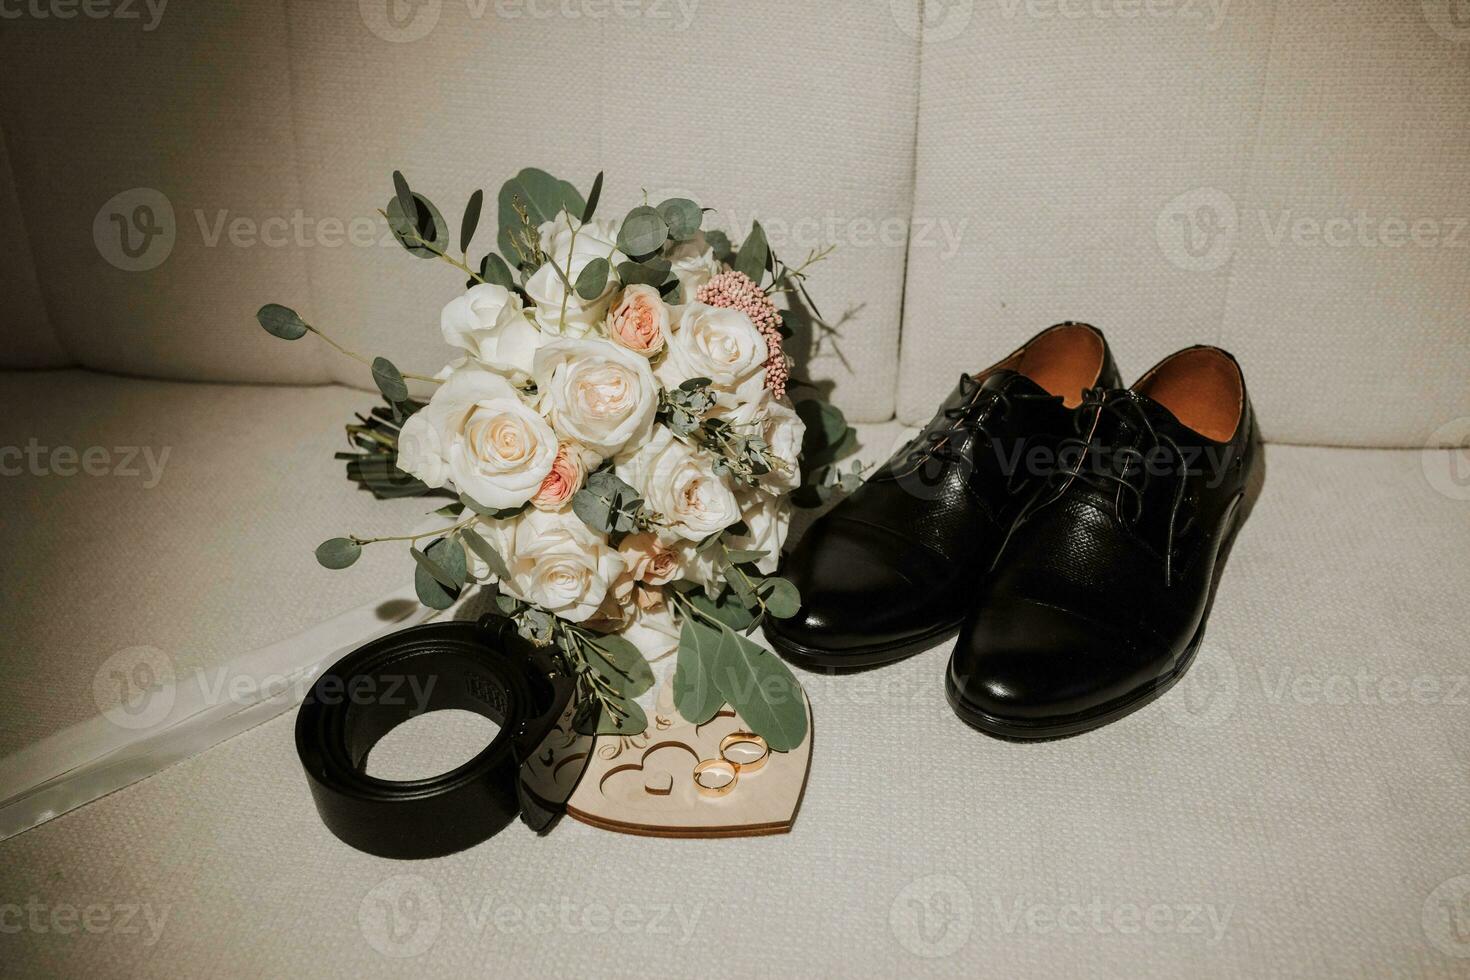 details of the groom are arranged in a composition. Black shoes, wedding bouquet, gold wedding rings on a wooden stand, black men's belt photo